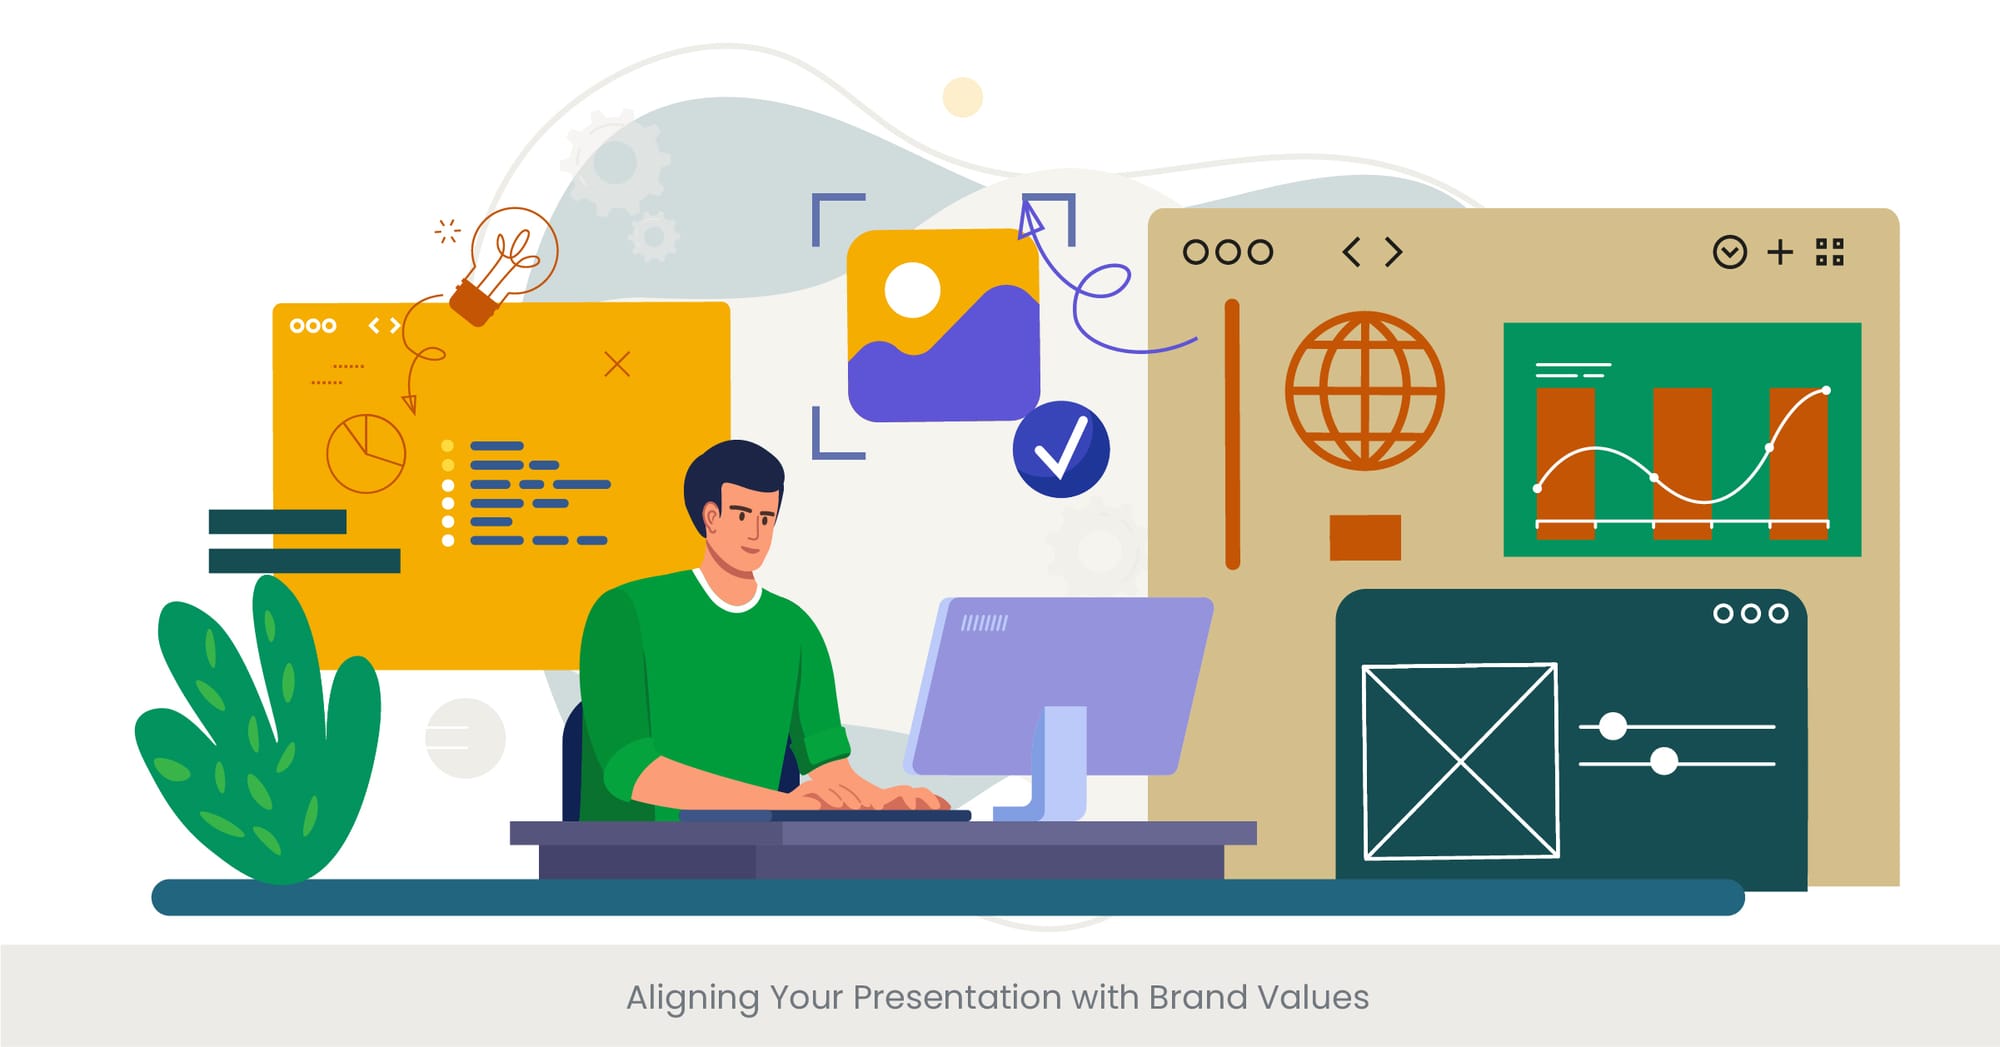 Aligning Your Presentation with Brand Values